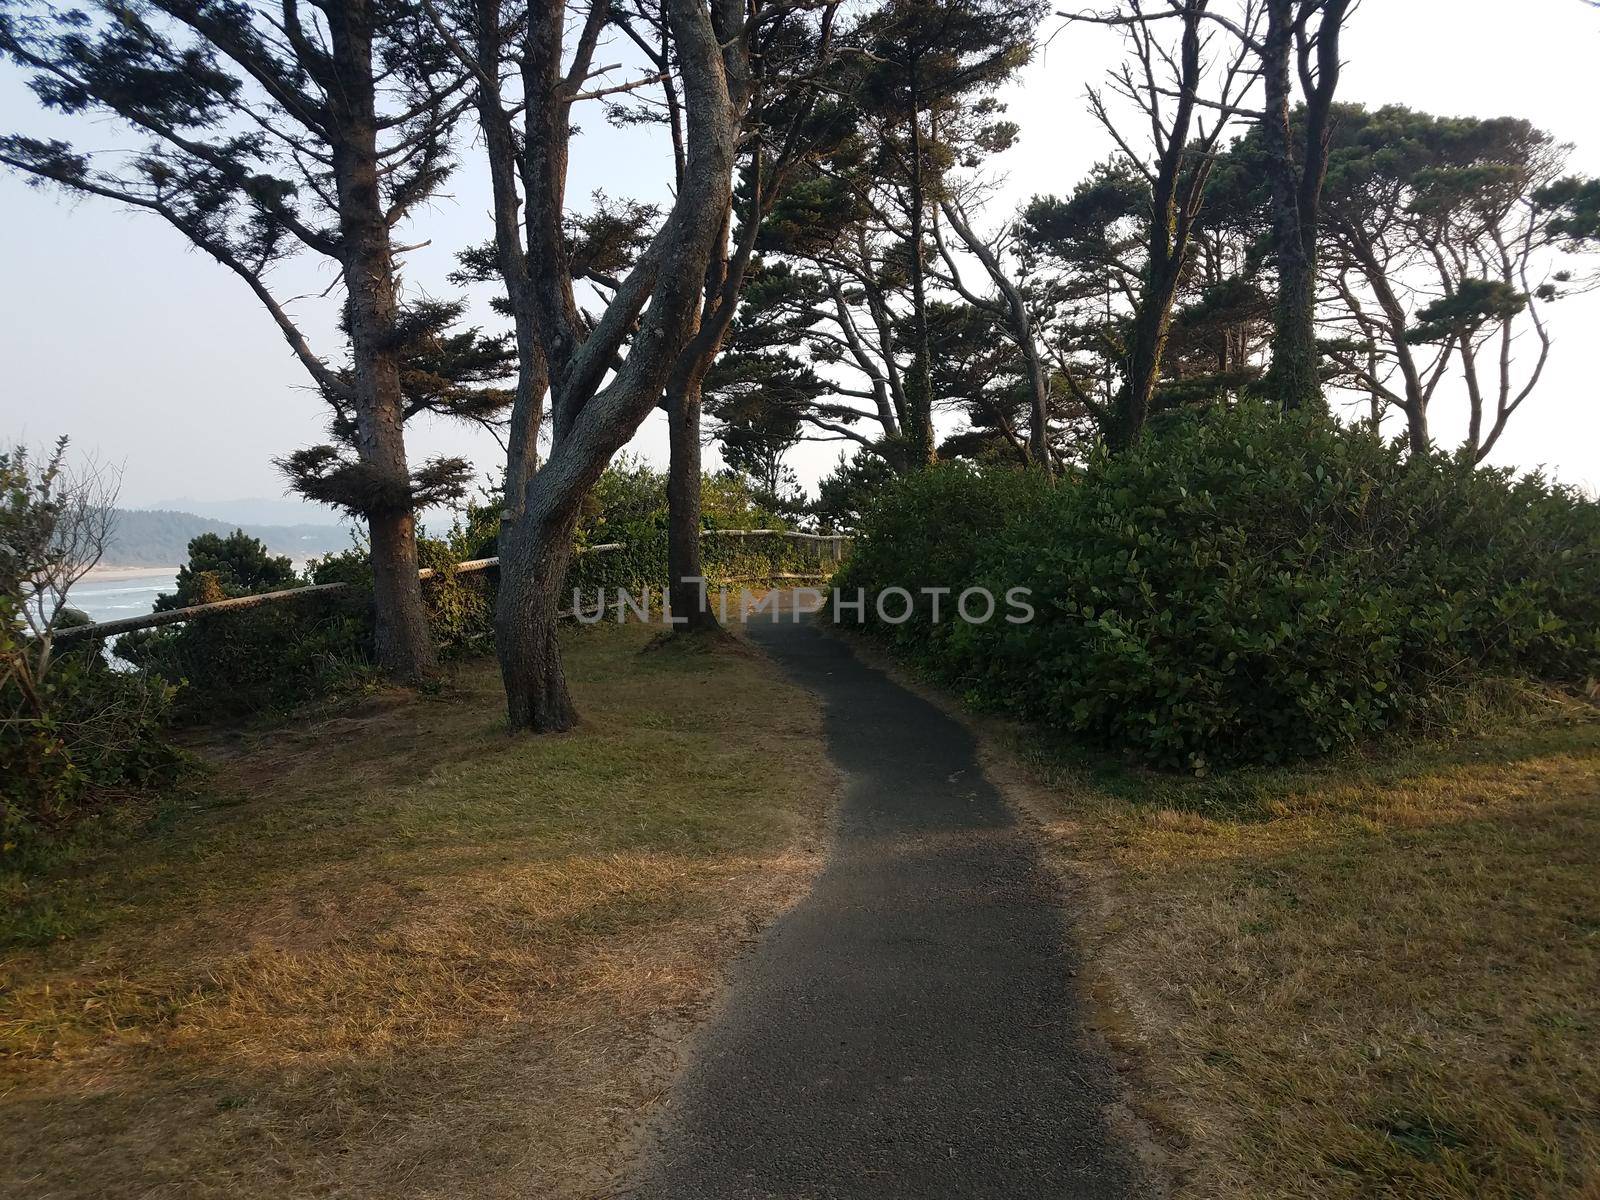 asphalt trail and trees with water on Oregon coast by stockphotofan1